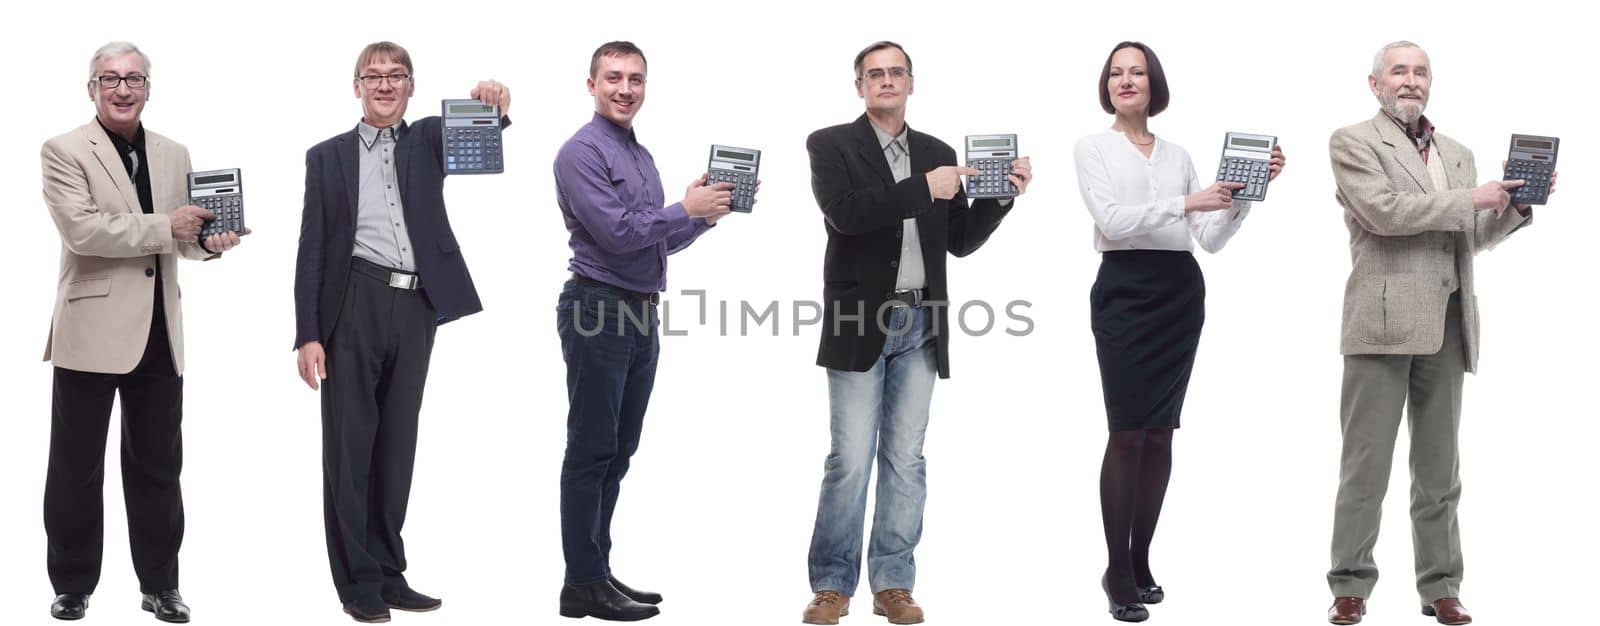 collage of people demonstrate calculator in hand isolated on white background